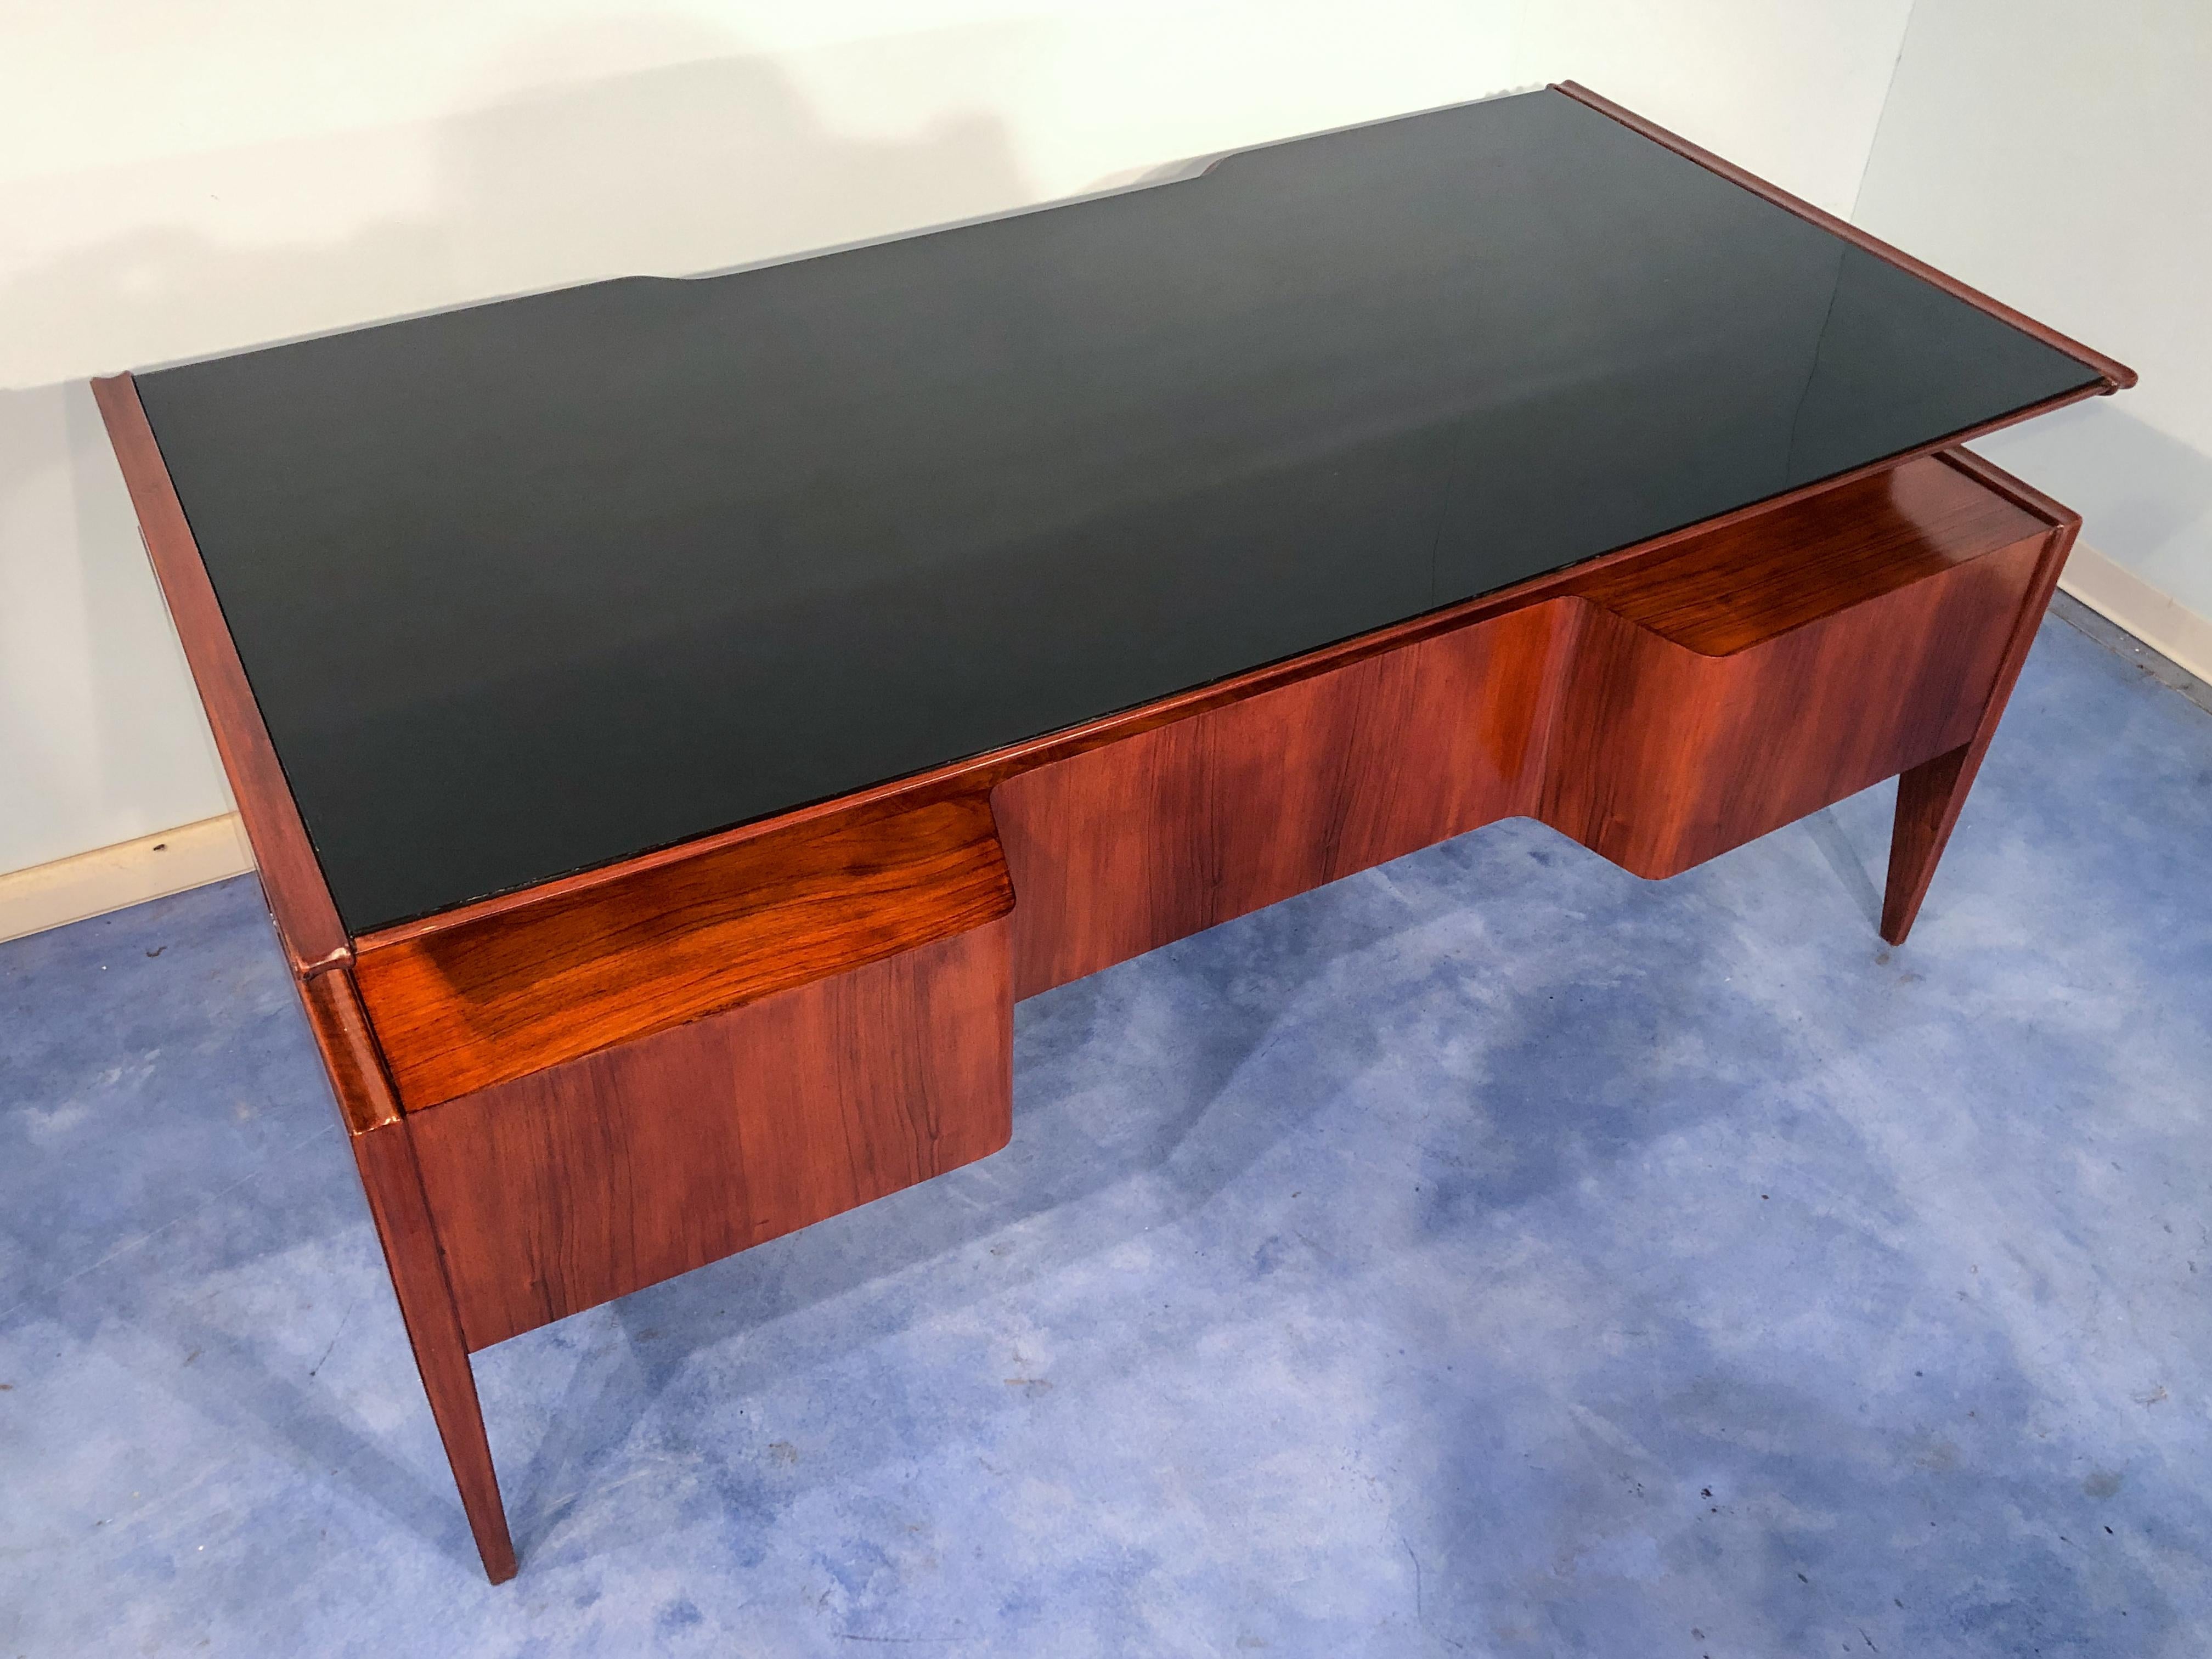 Outstanding Italian midcentury executive walnut desk. Very well designed and attributable to Guglielmo Ulrich in the 1950s.
The top has a curved shape and the surface in black glass, the contrast between the walnut gives elegance and sophistication